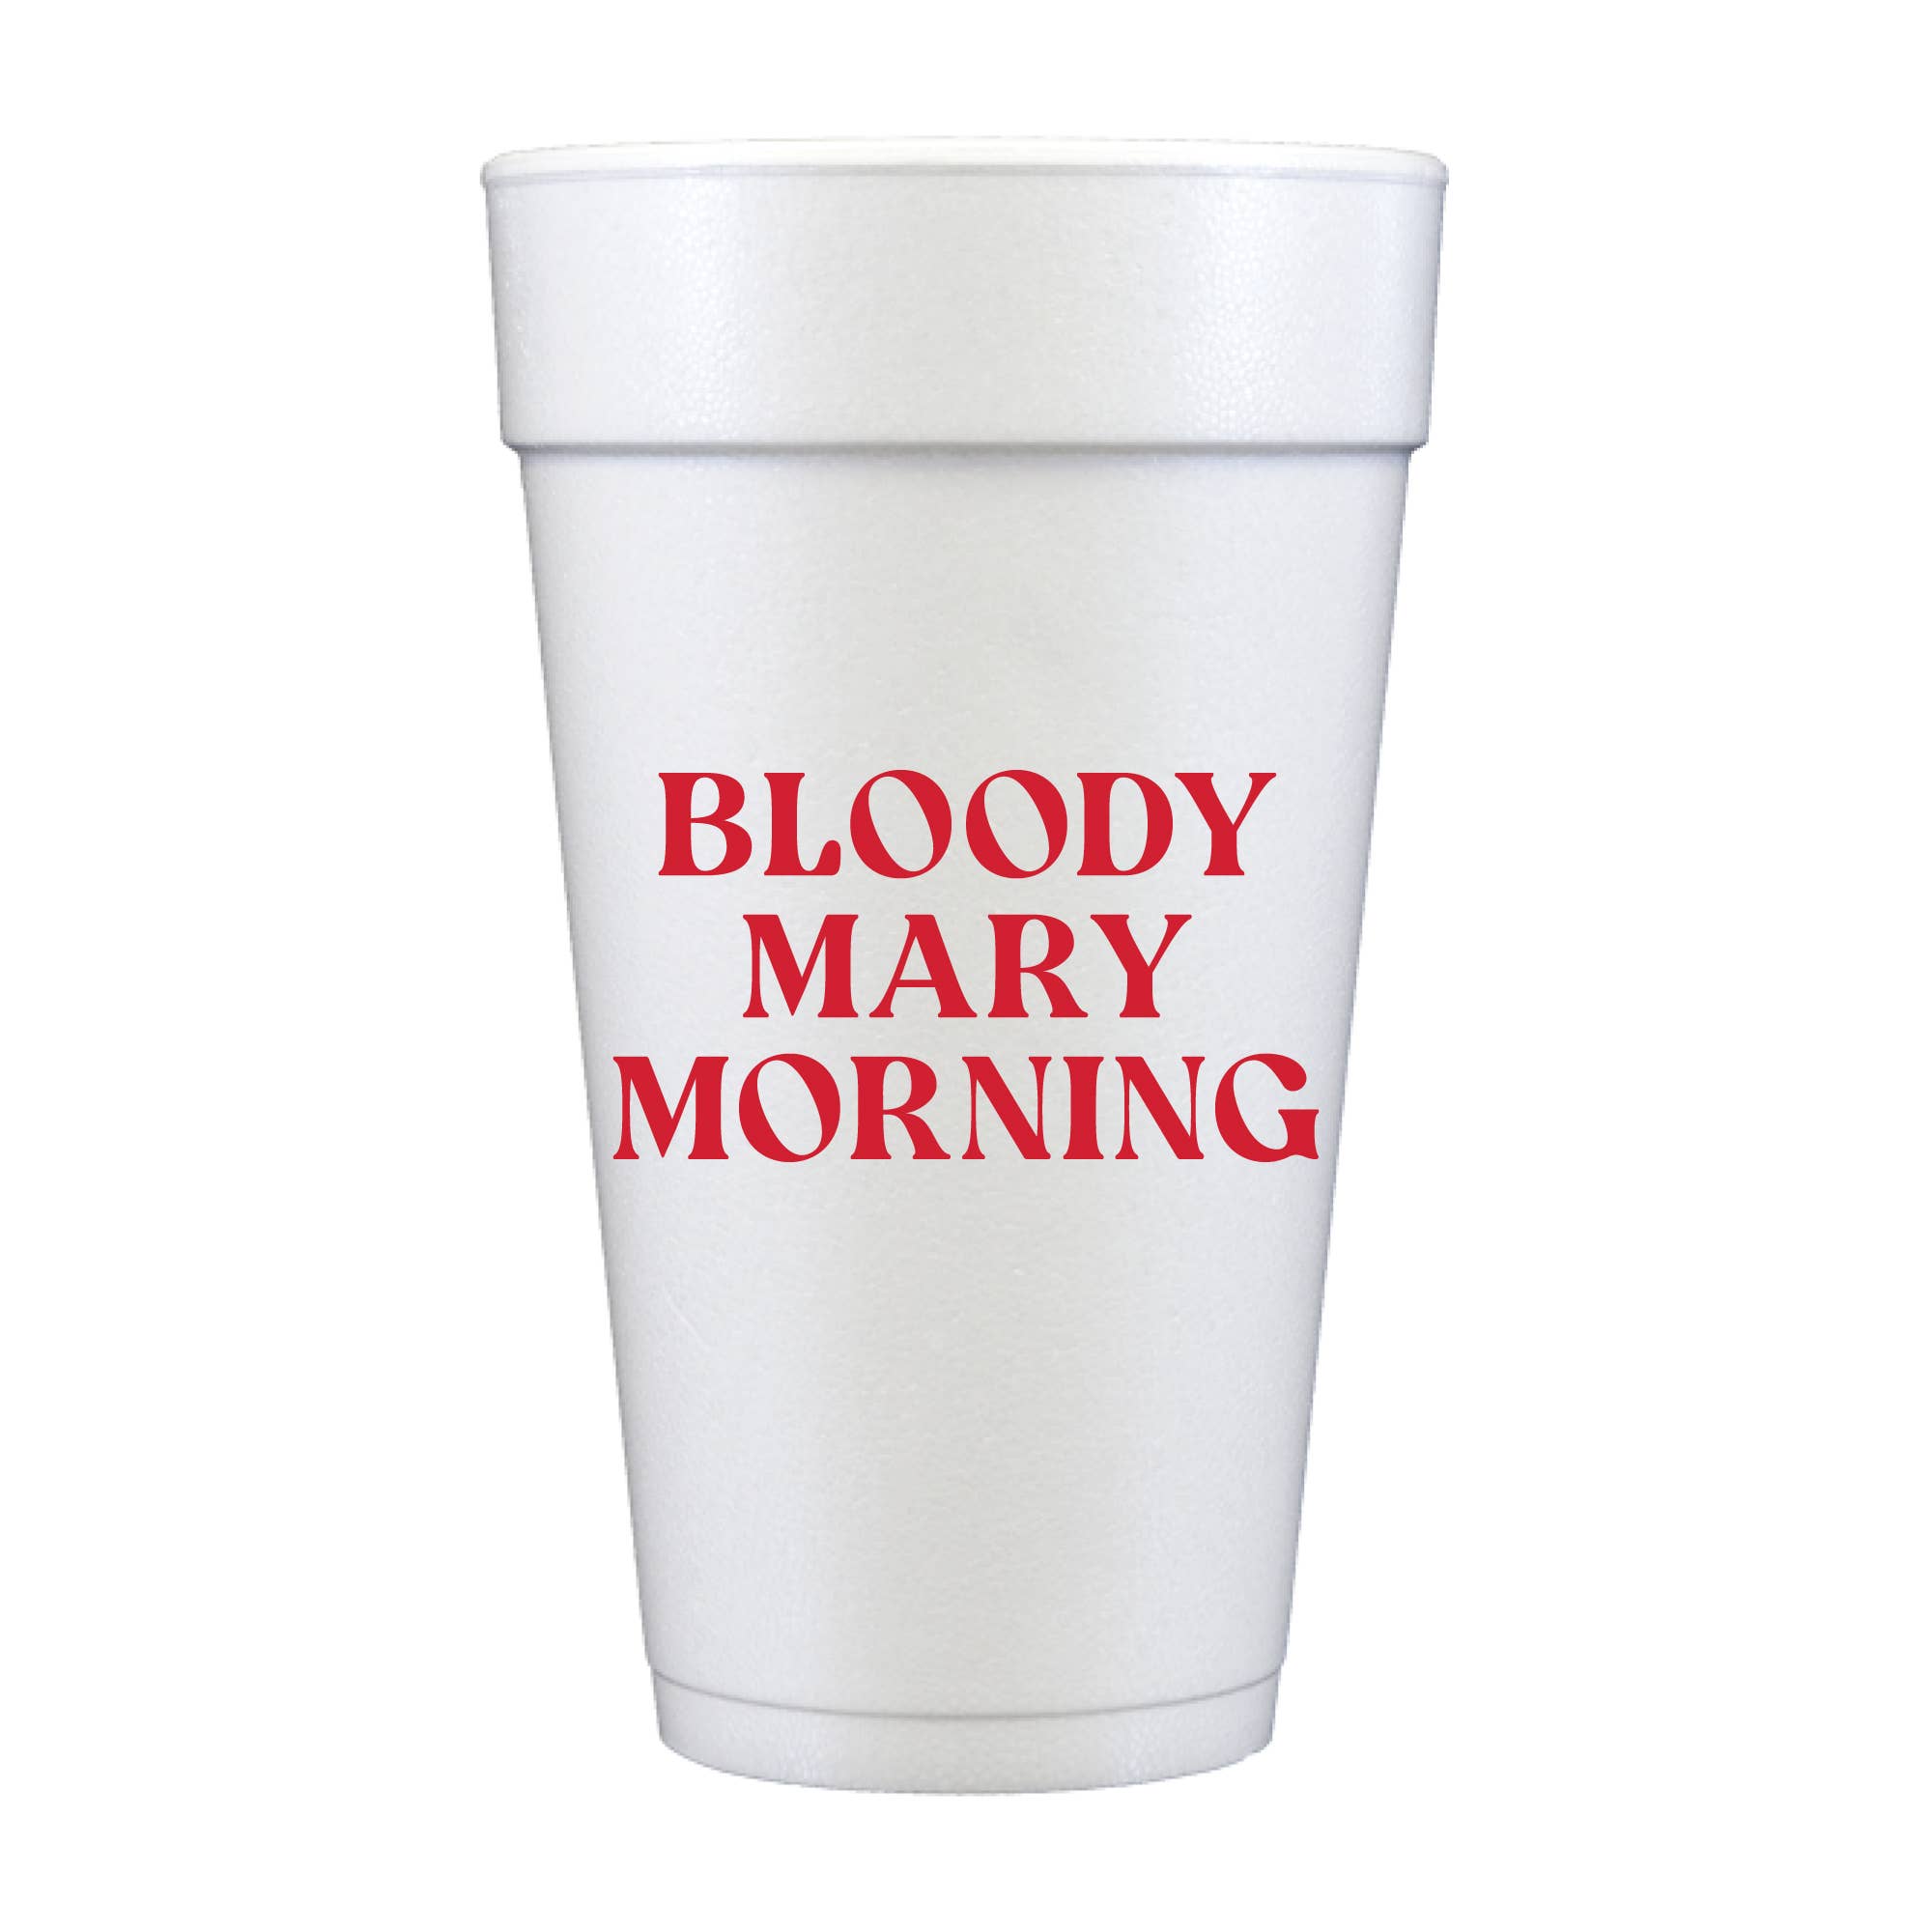 Bloody Mary Morning - Foam Cups